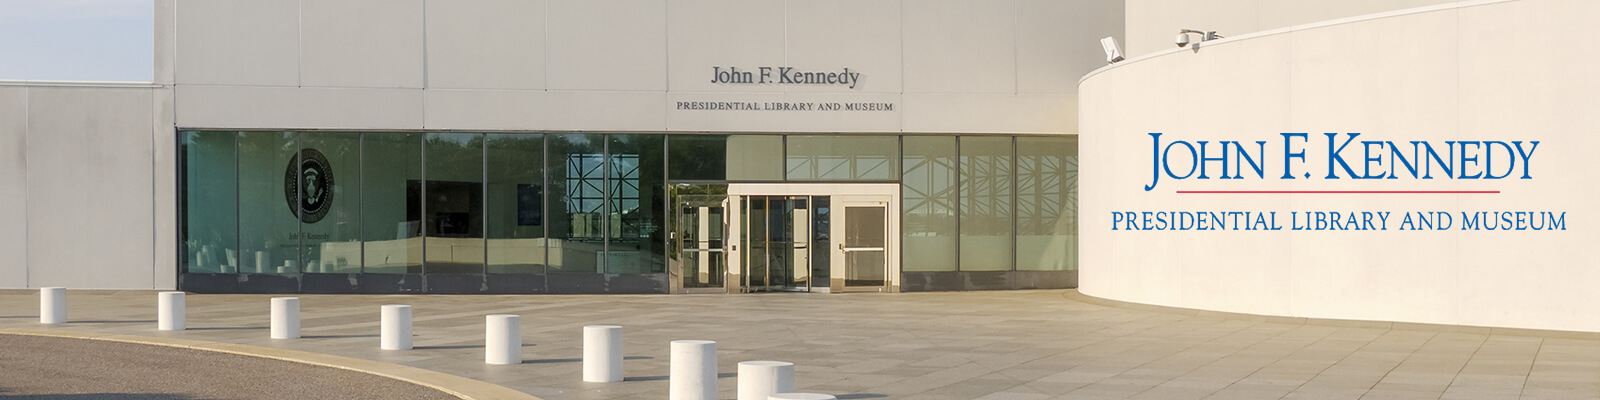 John F Kennedy Presidential Library and Museum Coupons